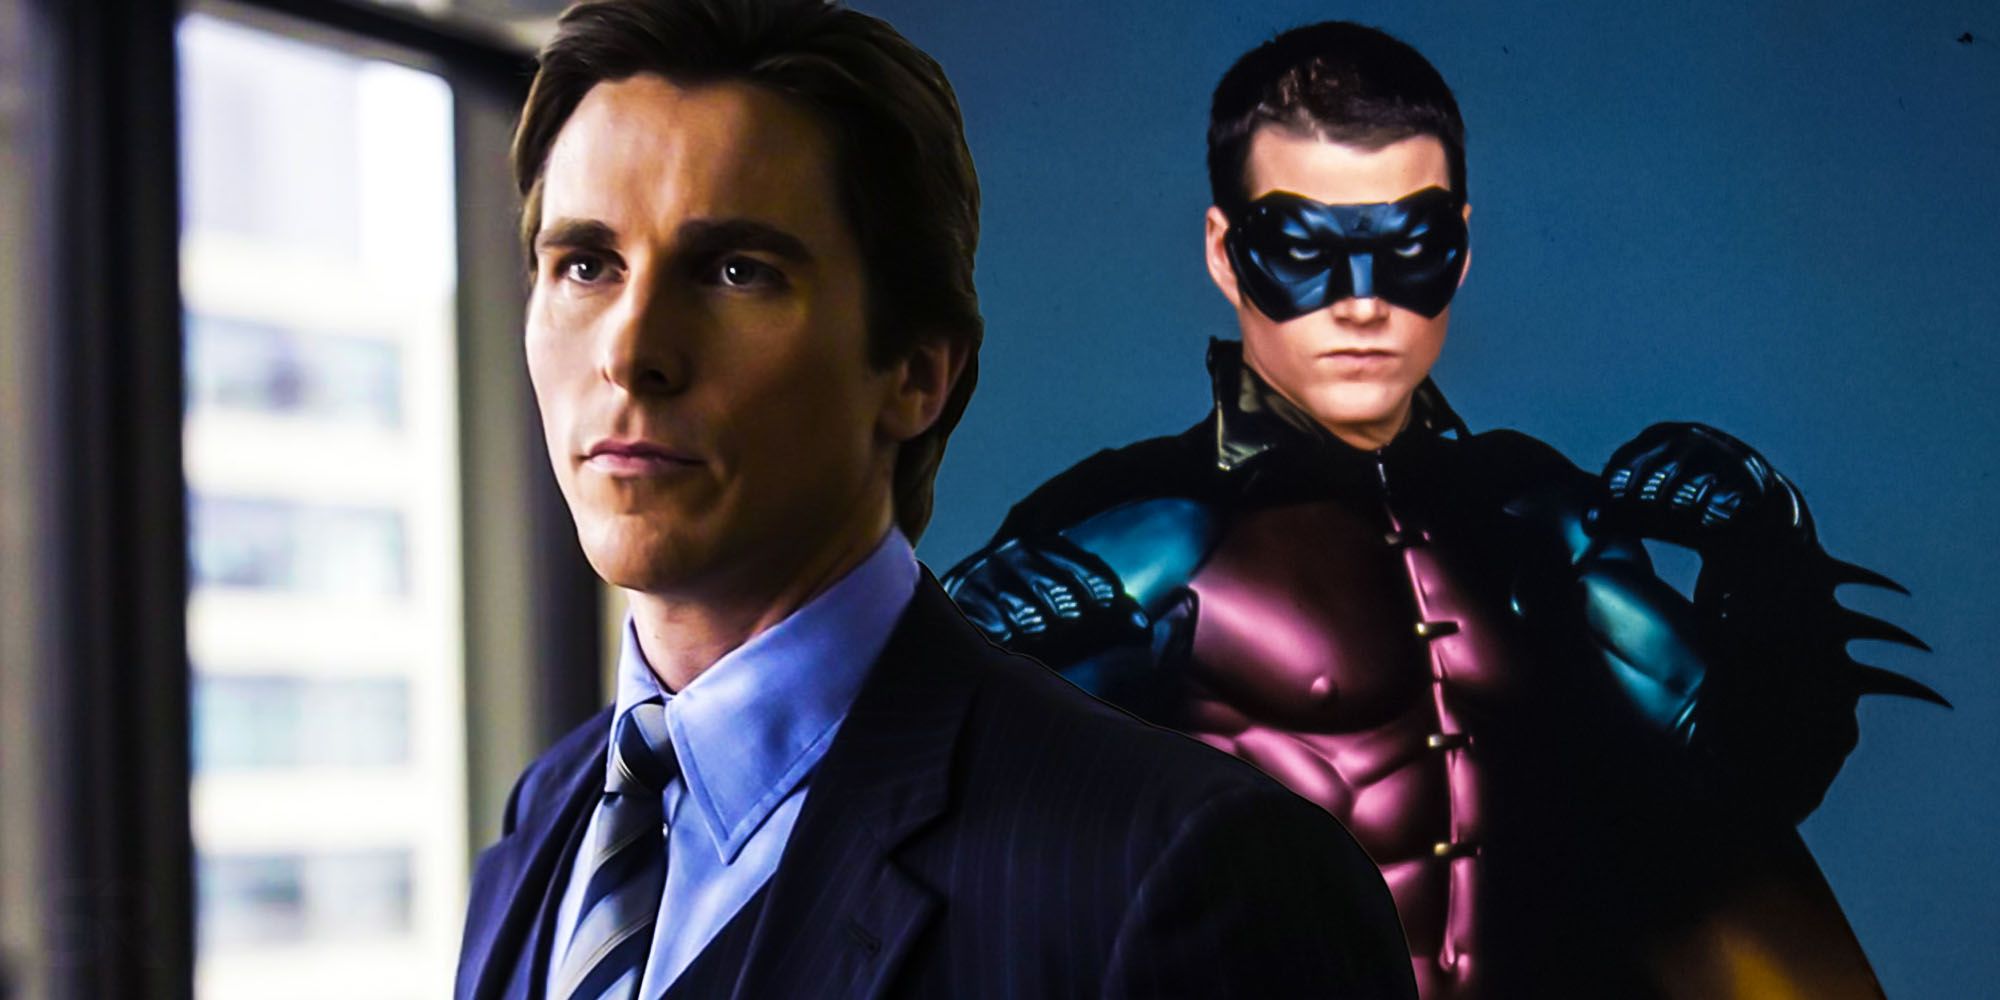 Christian bale audition to play robin batman Forever chris odonnell